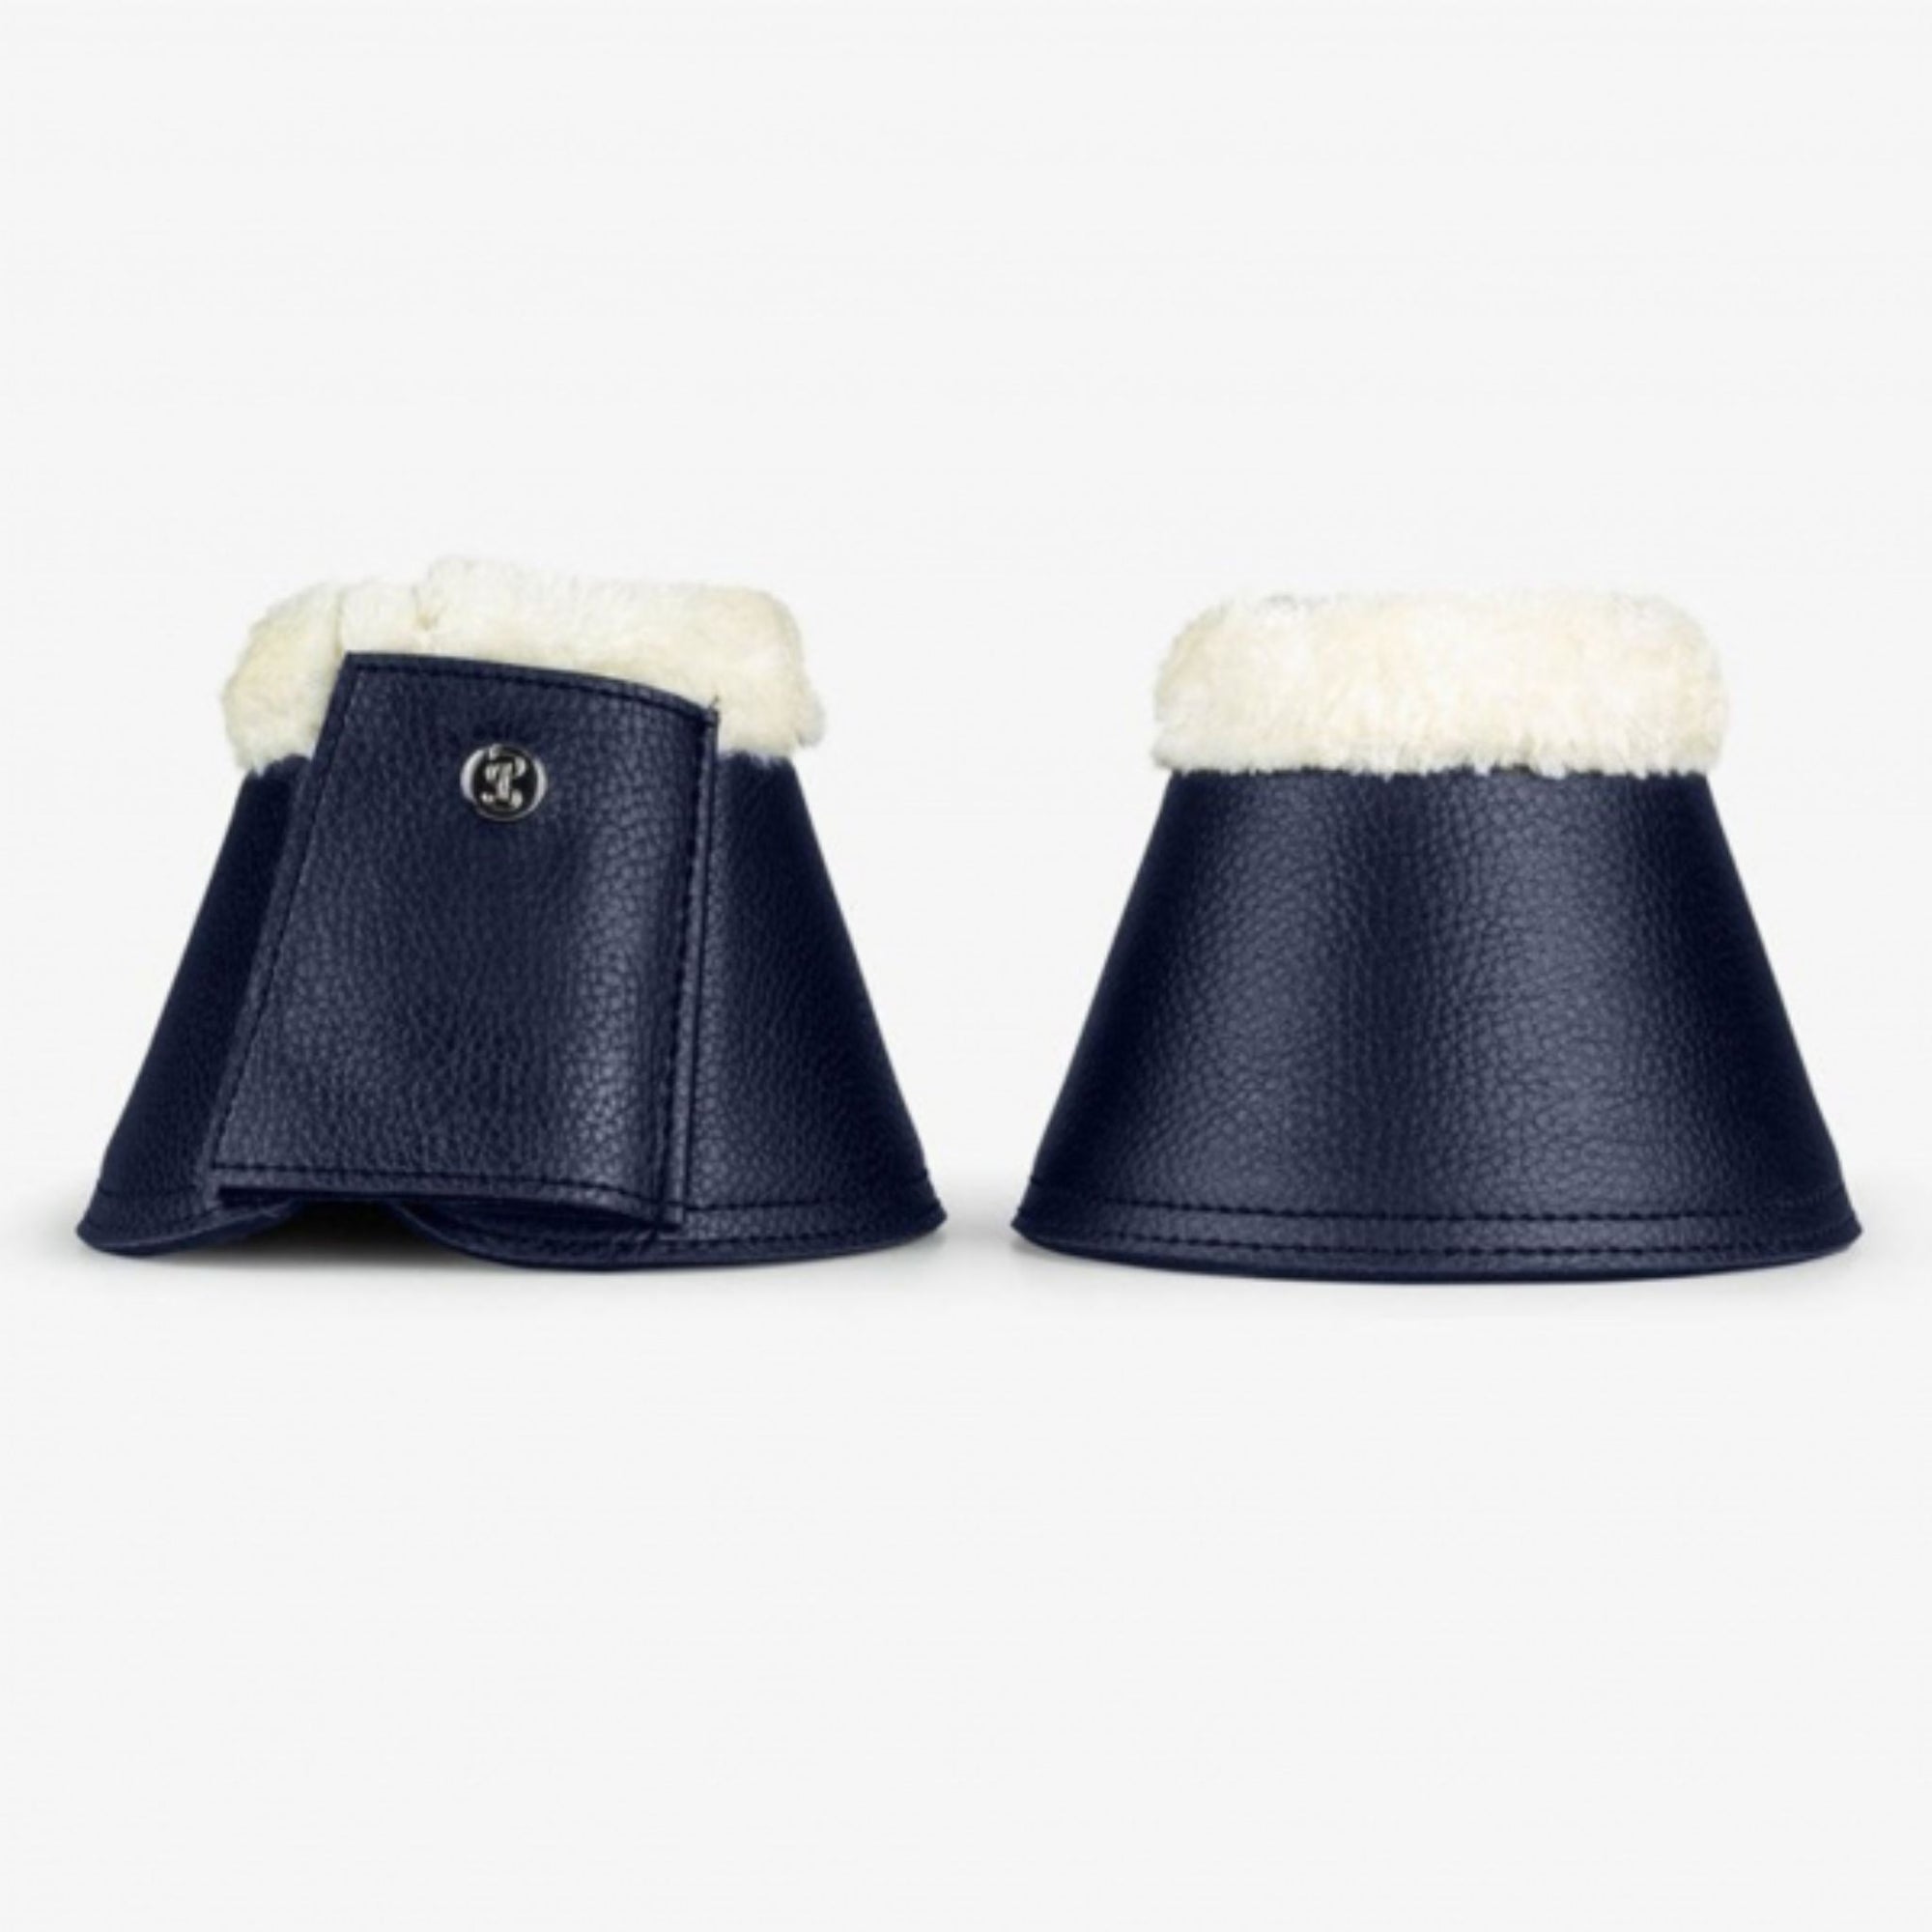 Deep blue bell boots with white fluffy rims and a small silver PSOS logo detailing